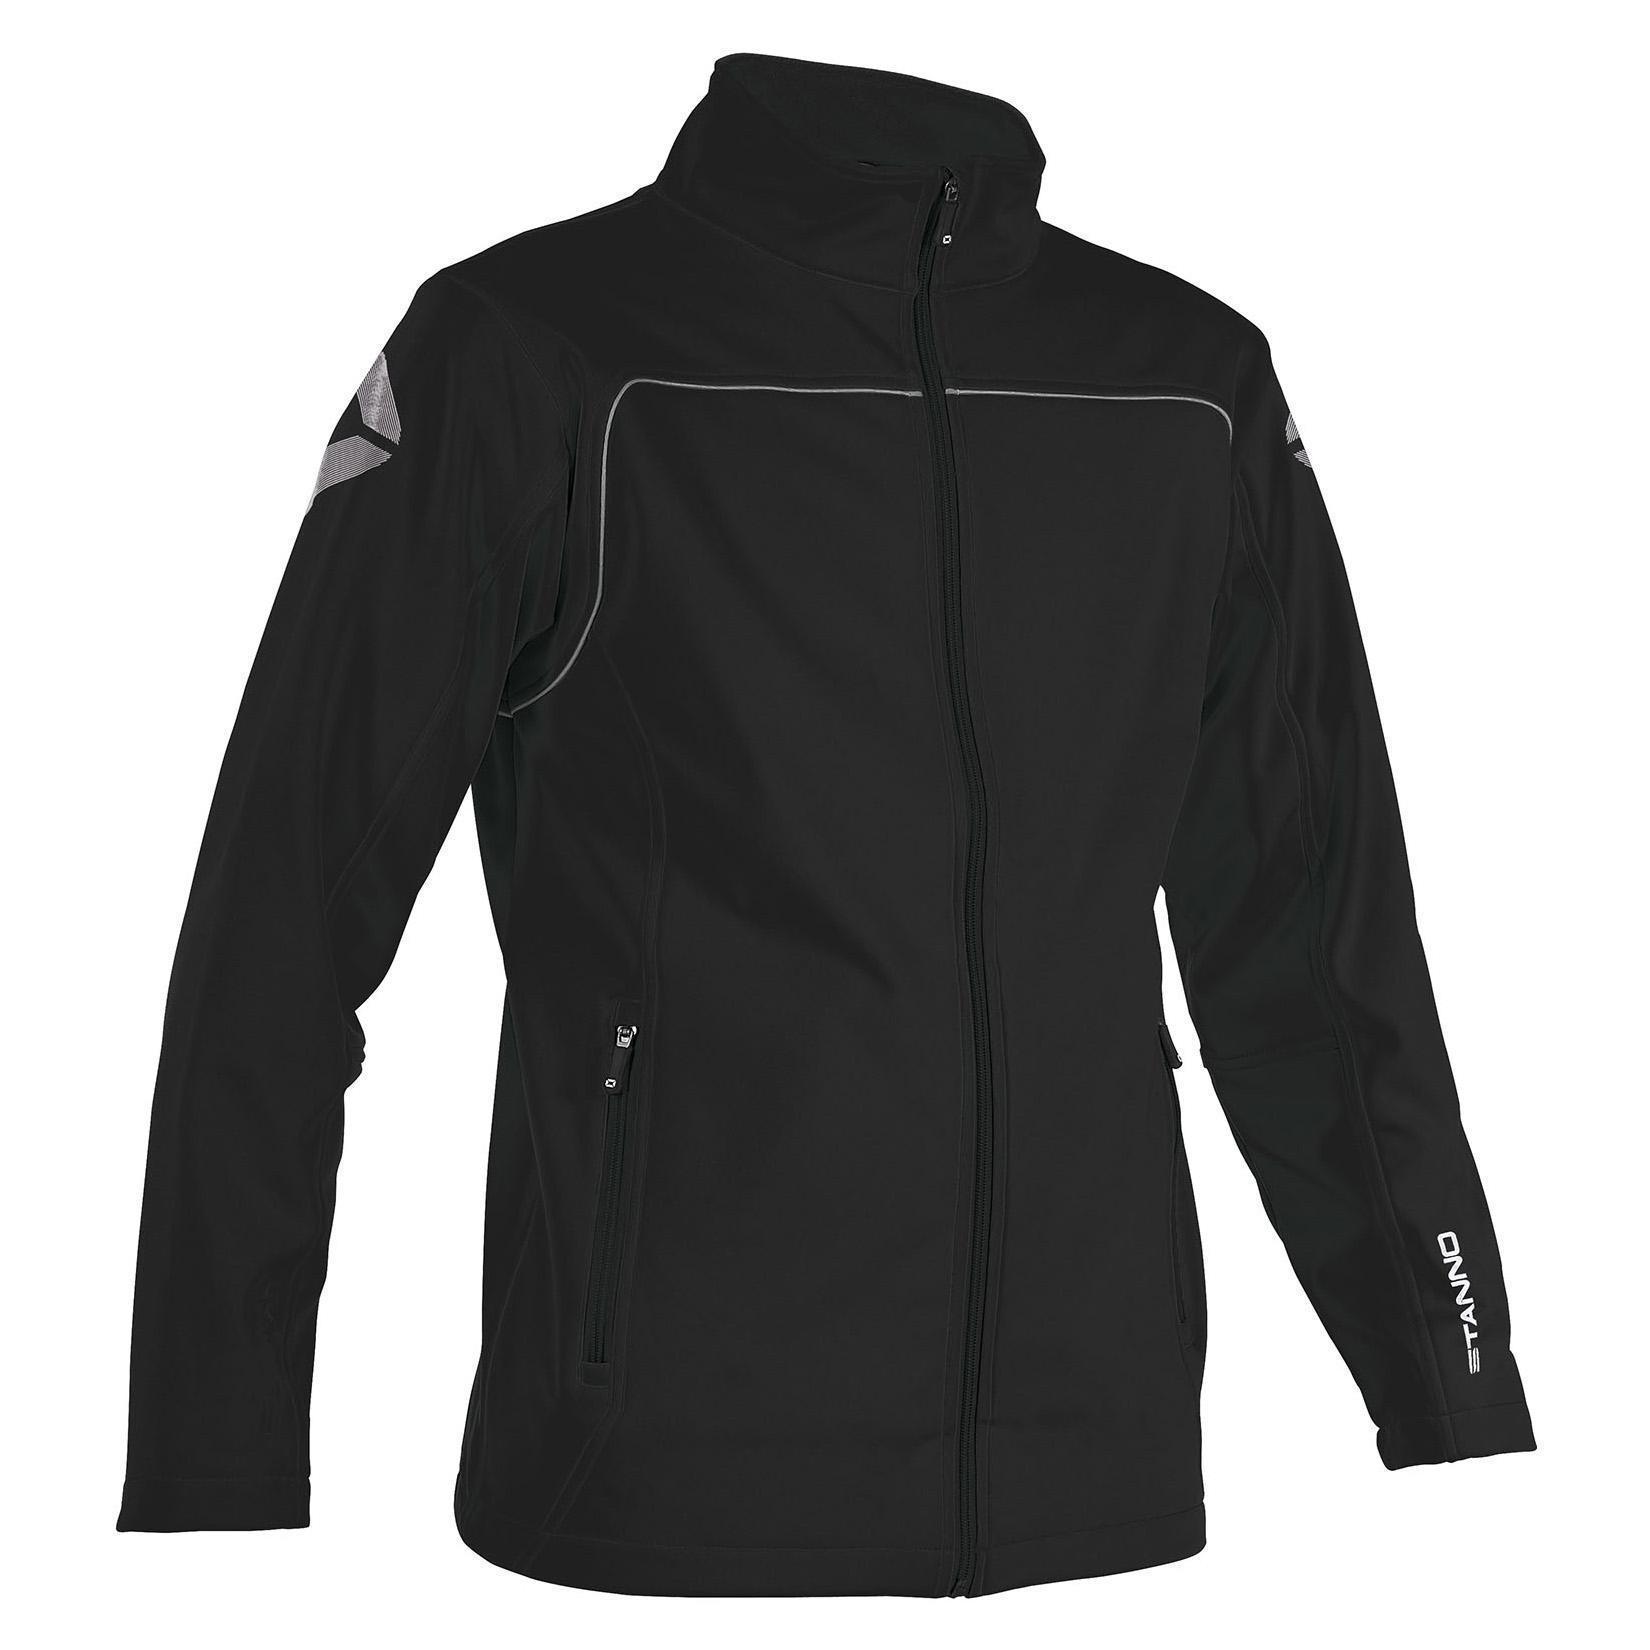 Stanno Corporate Soft Shell Jacket